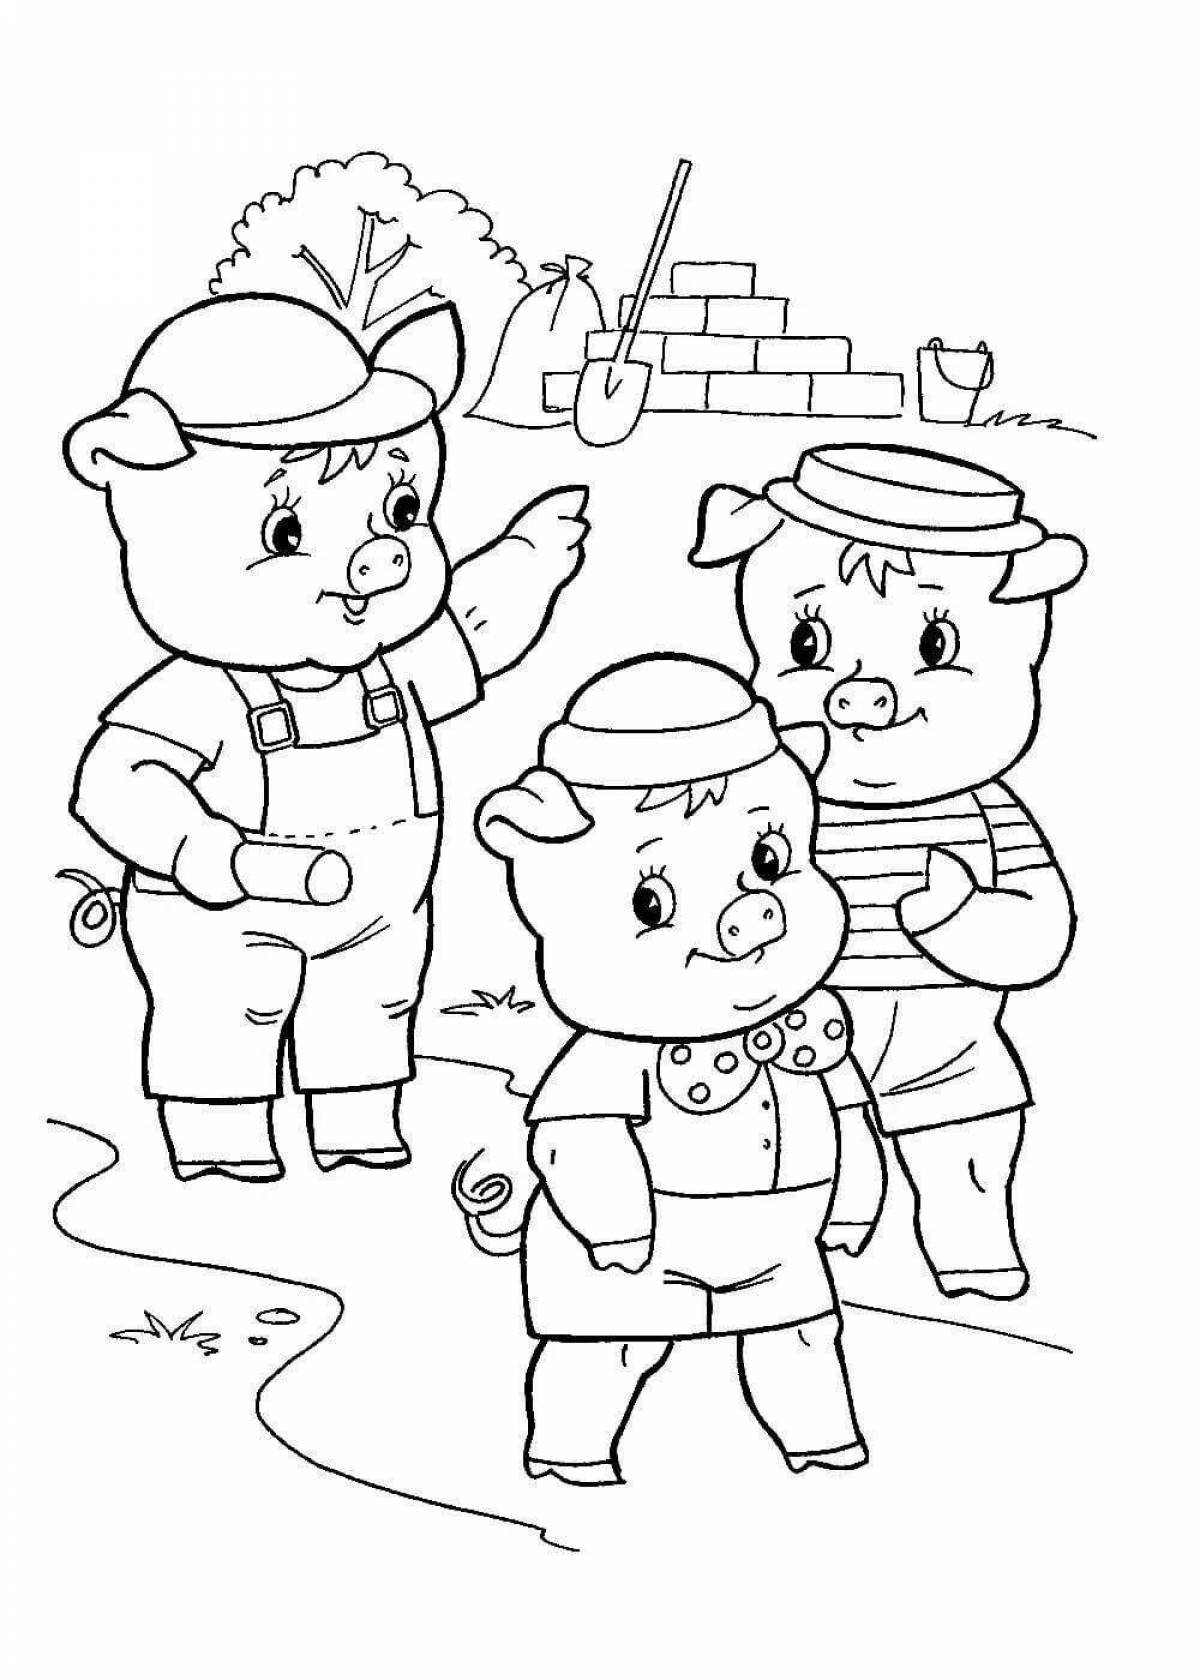 Creative coloring three little pigs for children 3-4 years old